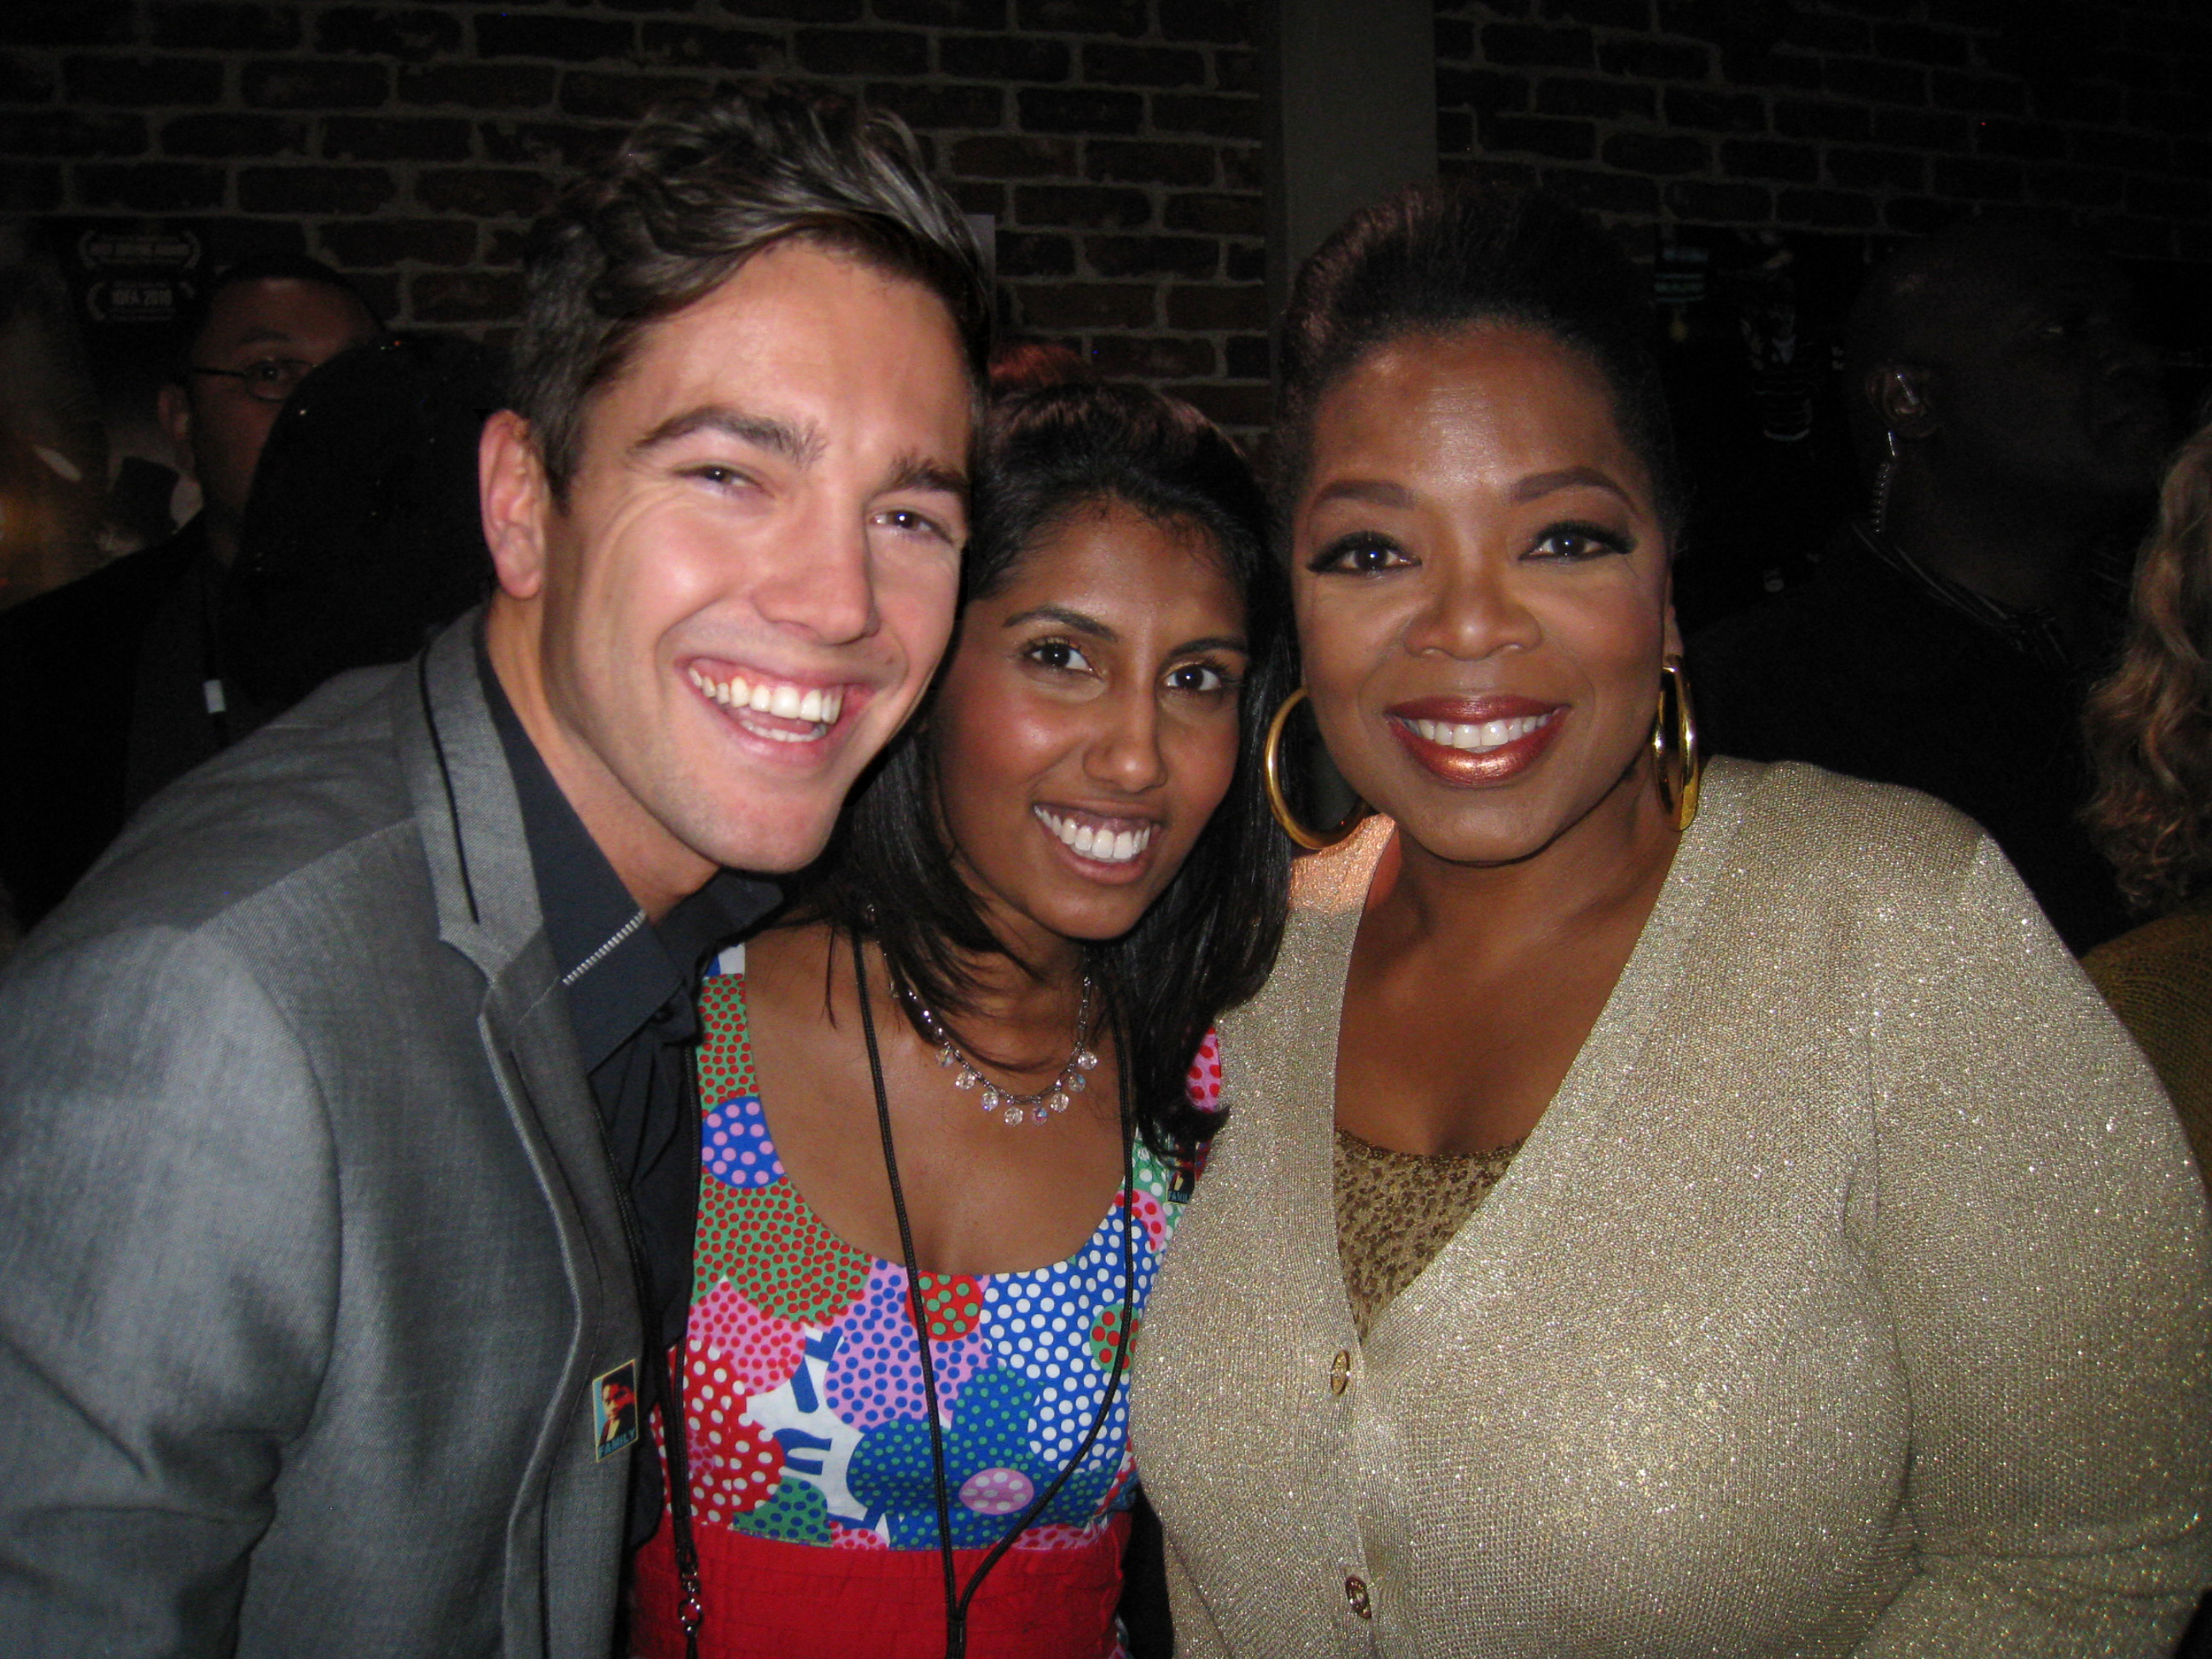 65_RedRoses filmmakers Nimisha Mukerji and Philip Lyall with Oprah at OWN Doc Club launch, Sundance 2011.